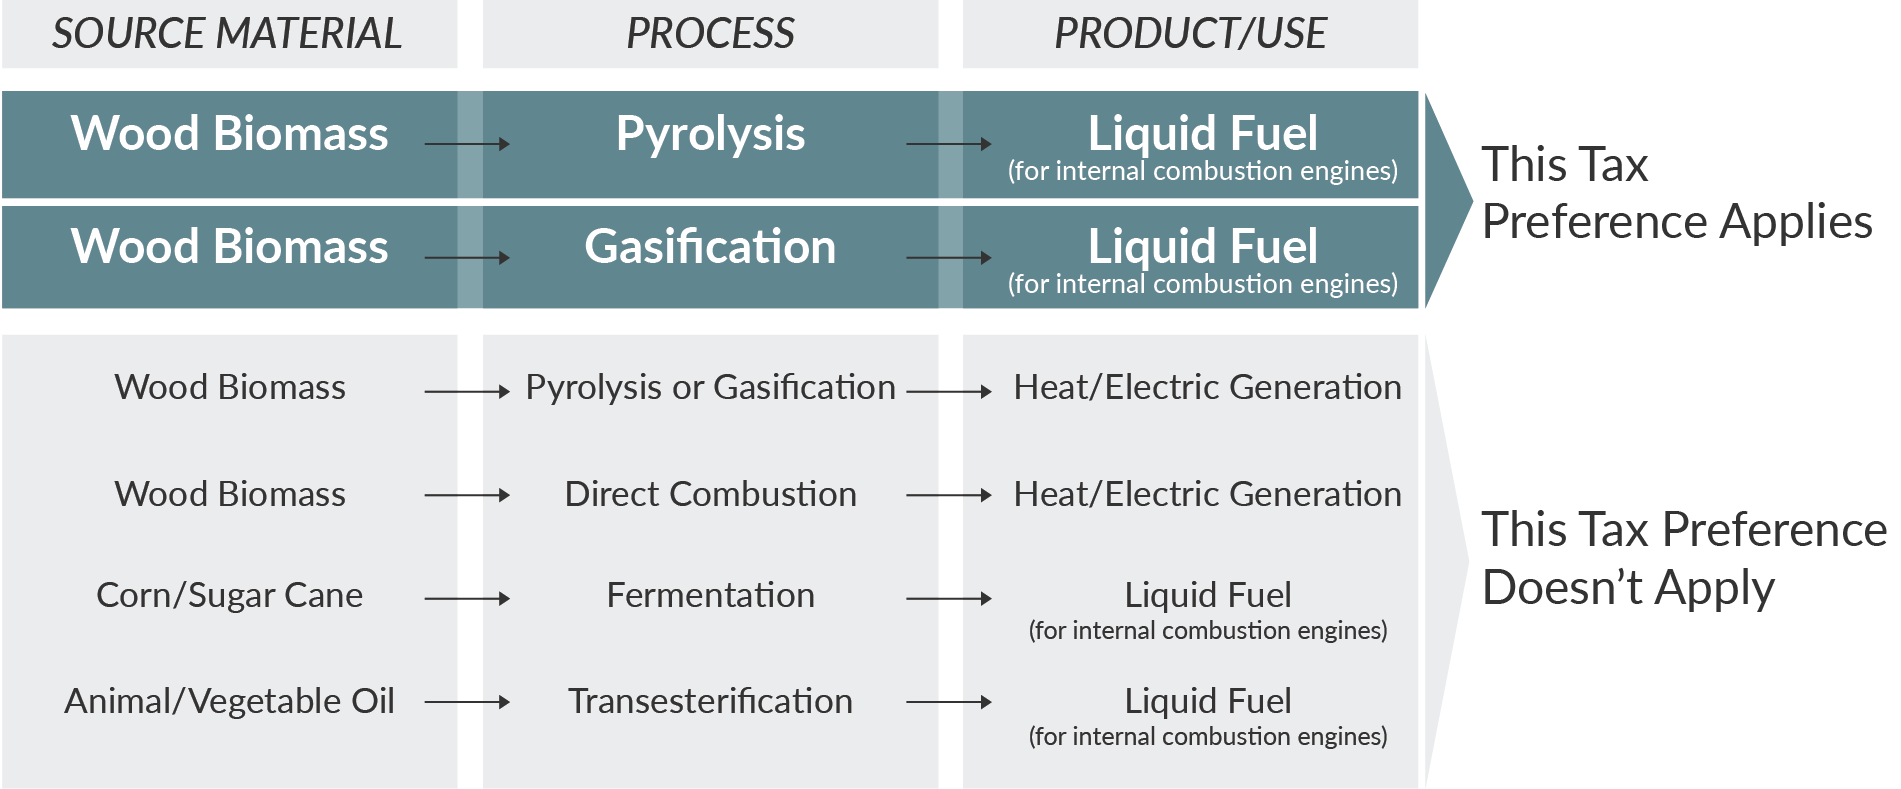 Graphic showing which combination of source material, process, and product or use qualifies for the tax preference.  
Only converting wood biomass through pyrolysis or through gasification into liquid fuel for internal combustion engines qualifies for the preference.  
The graphic lists the following combinations that do not qualify: 
Converting wood biomass through pyrolysis or gasification into fuel burned for heat or electric generation.
Directly combusting wood biomass for electric or heat generation. 
Converting corn or sugar cane into liquid fuel through fermentation. 
Converting waste animal or vegetable oil to liquid fuel through transesterification.
